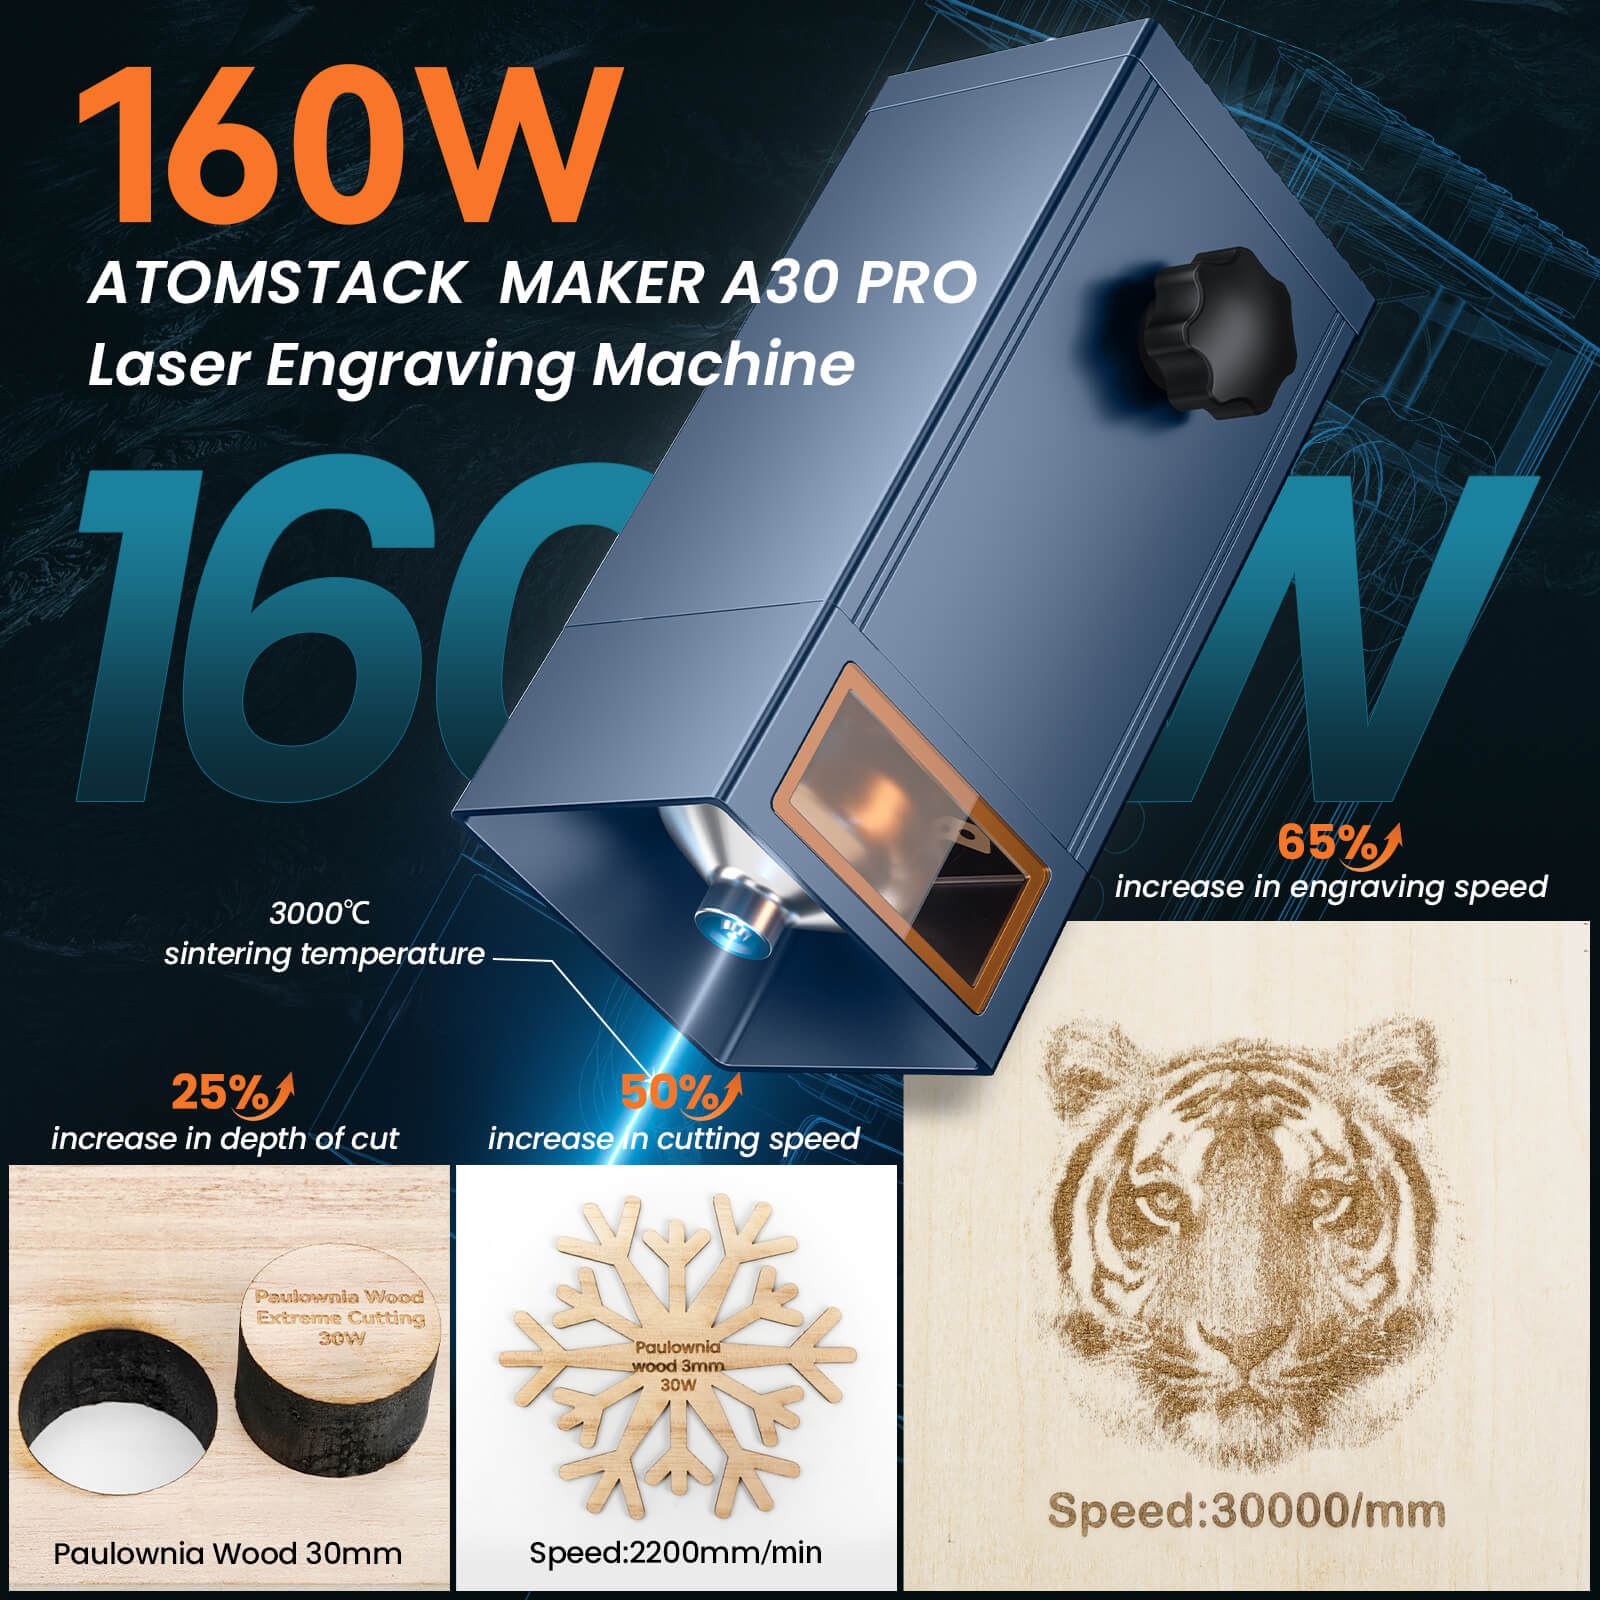 AtomStack A30 Pro  laser engraving  and cutting machine with F30 Pro air assist kit